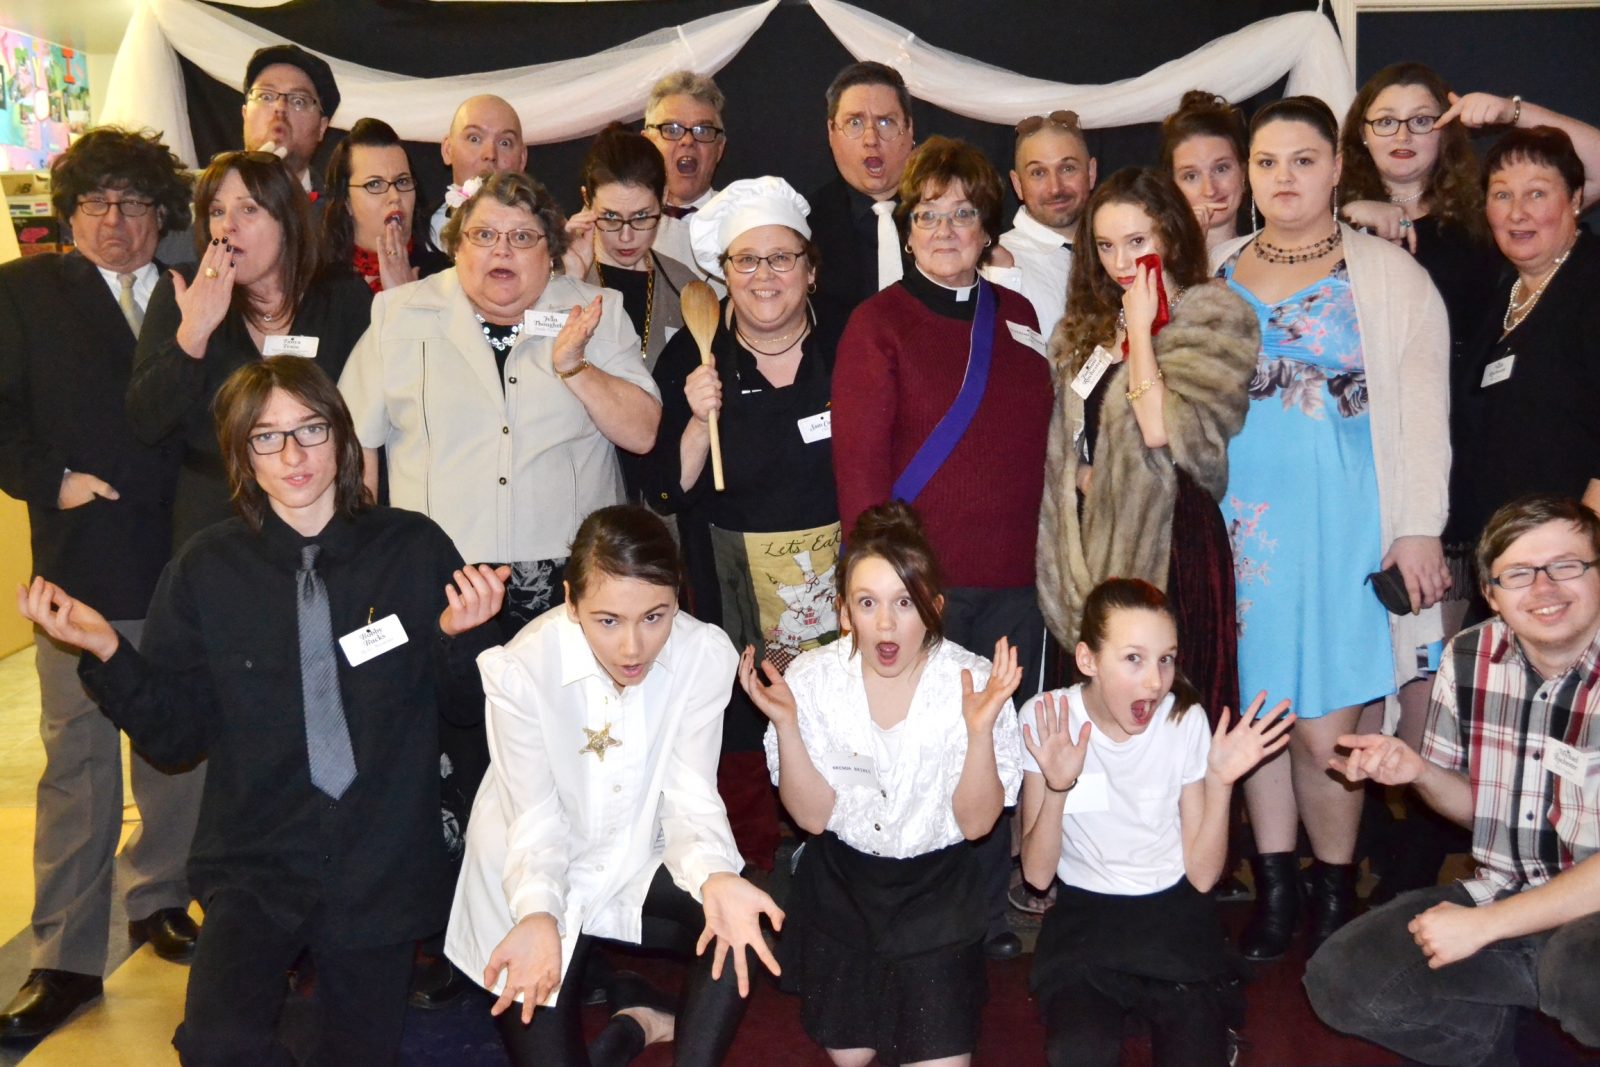 A real whodunit at the Missisquoi North Youth Centre in Potton